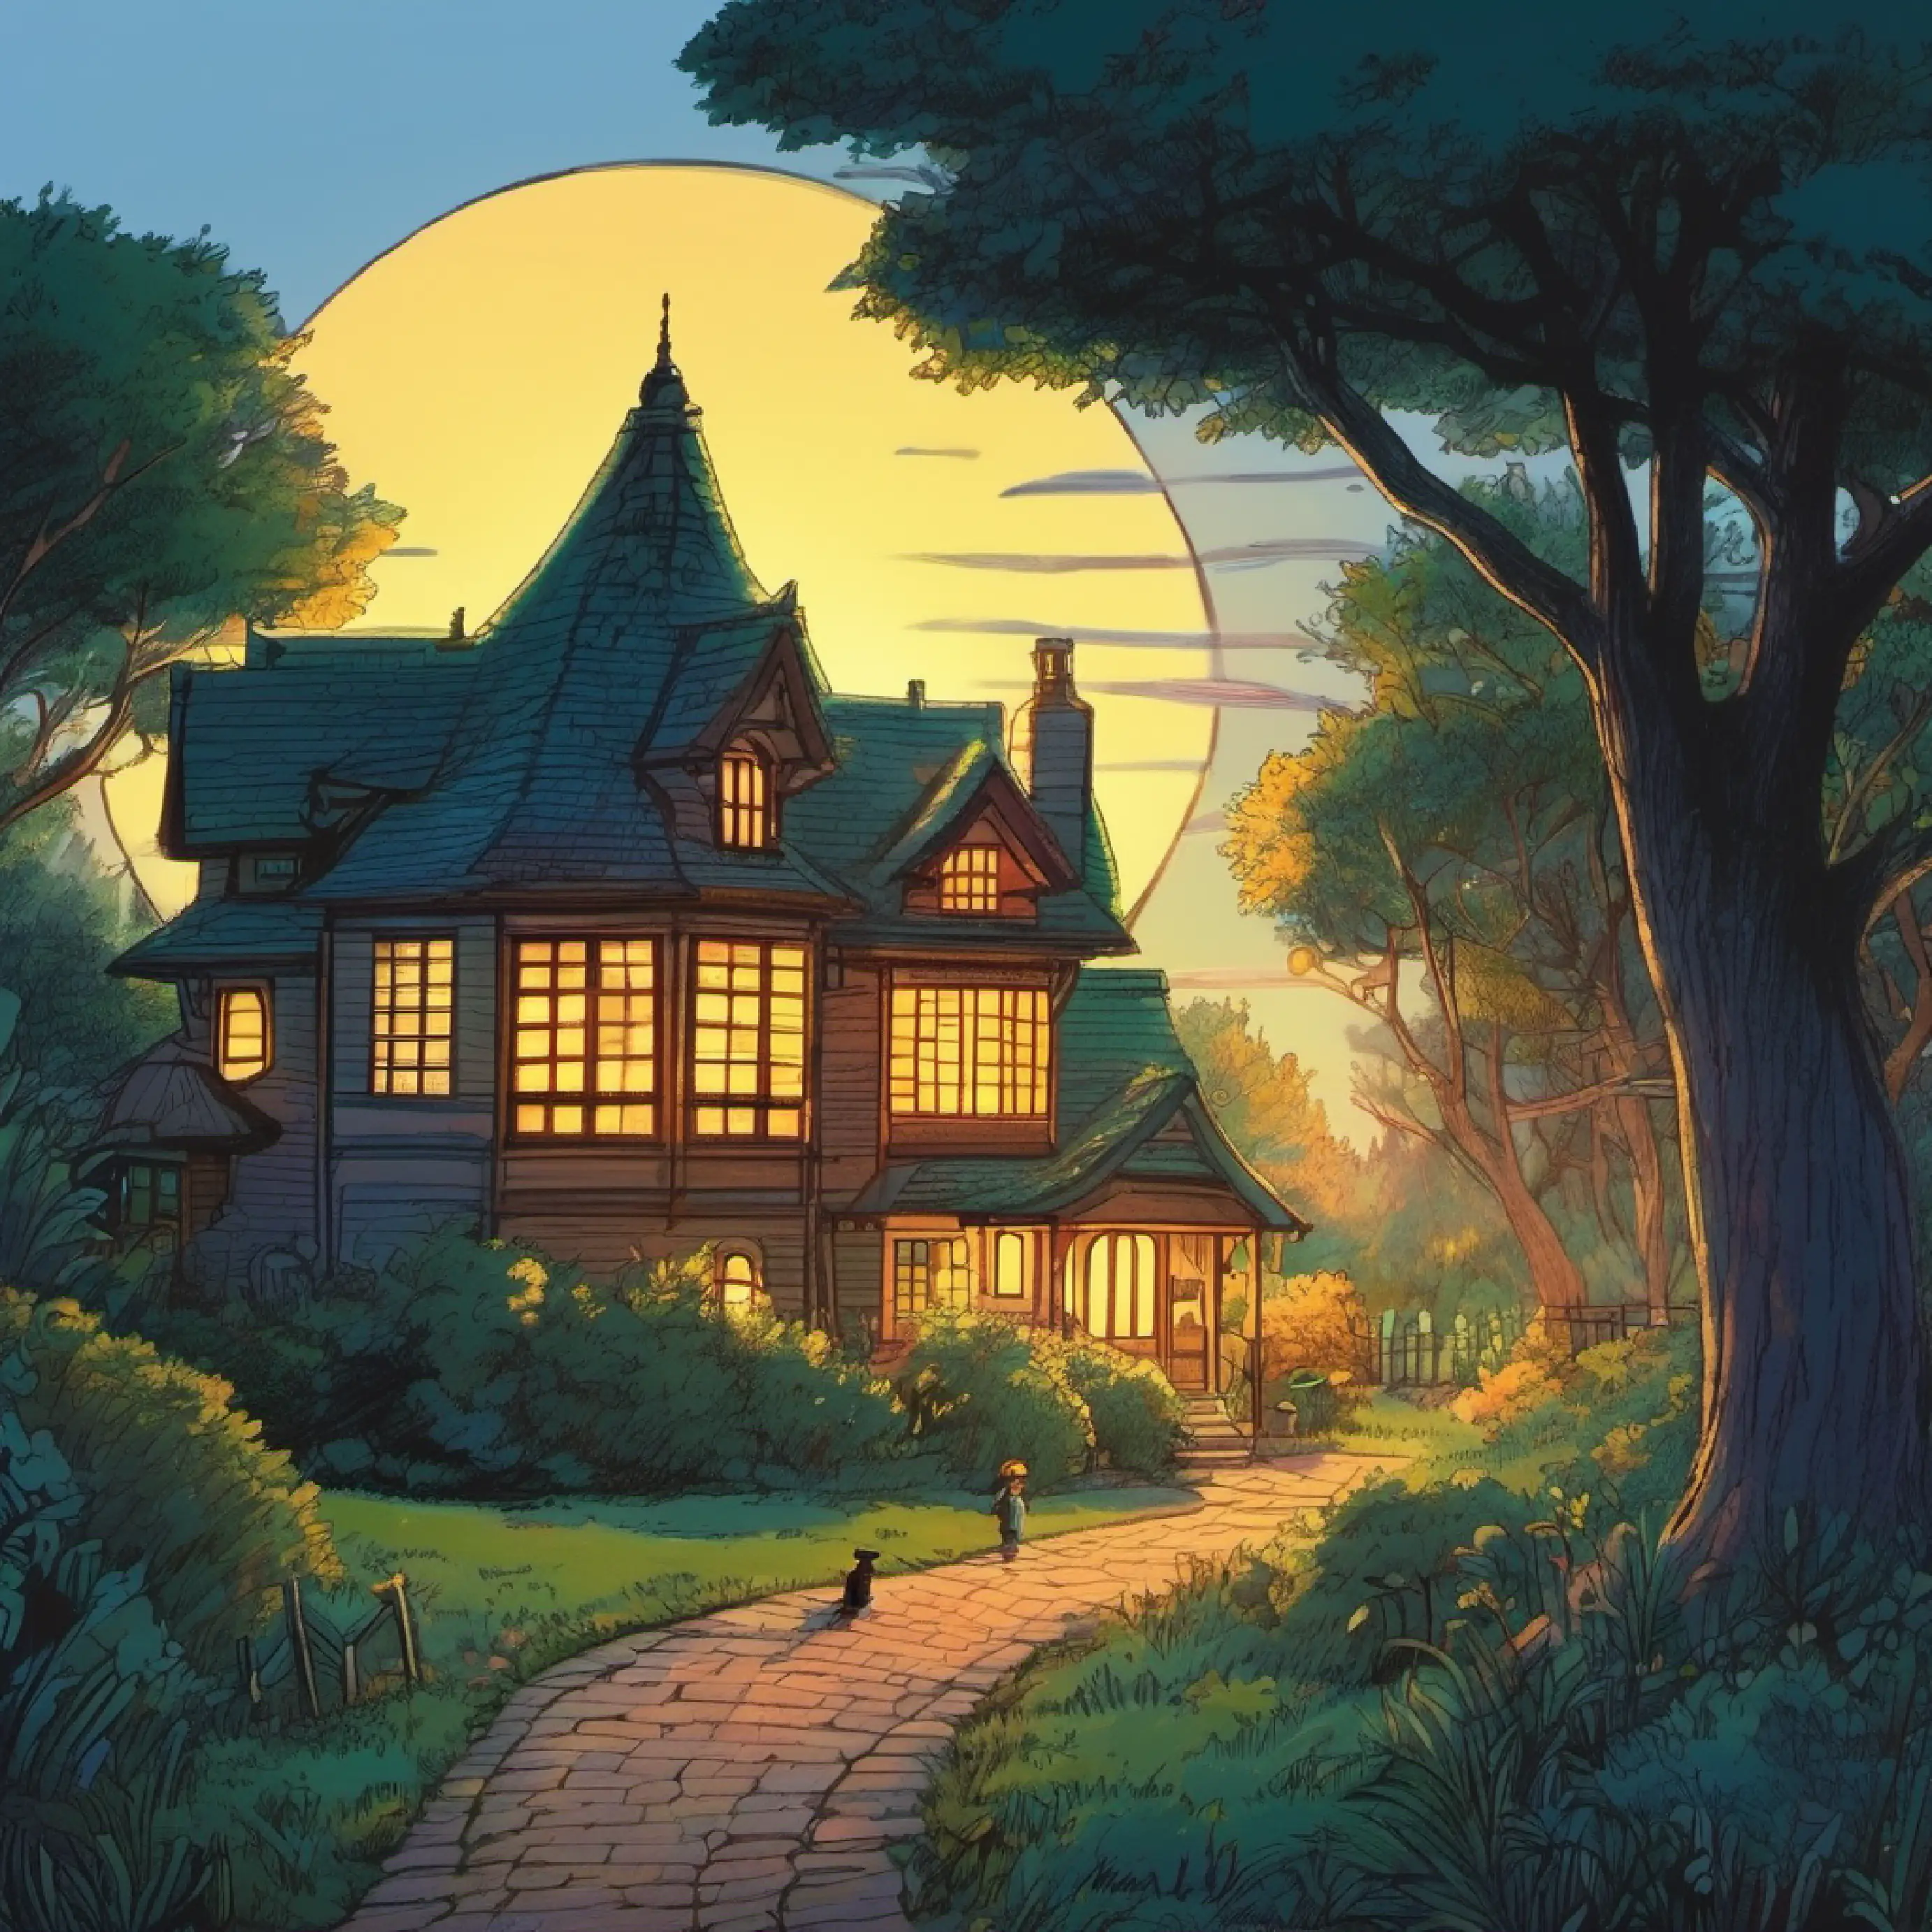 Evening play, mysterious light from Mr. Ravenwood's house